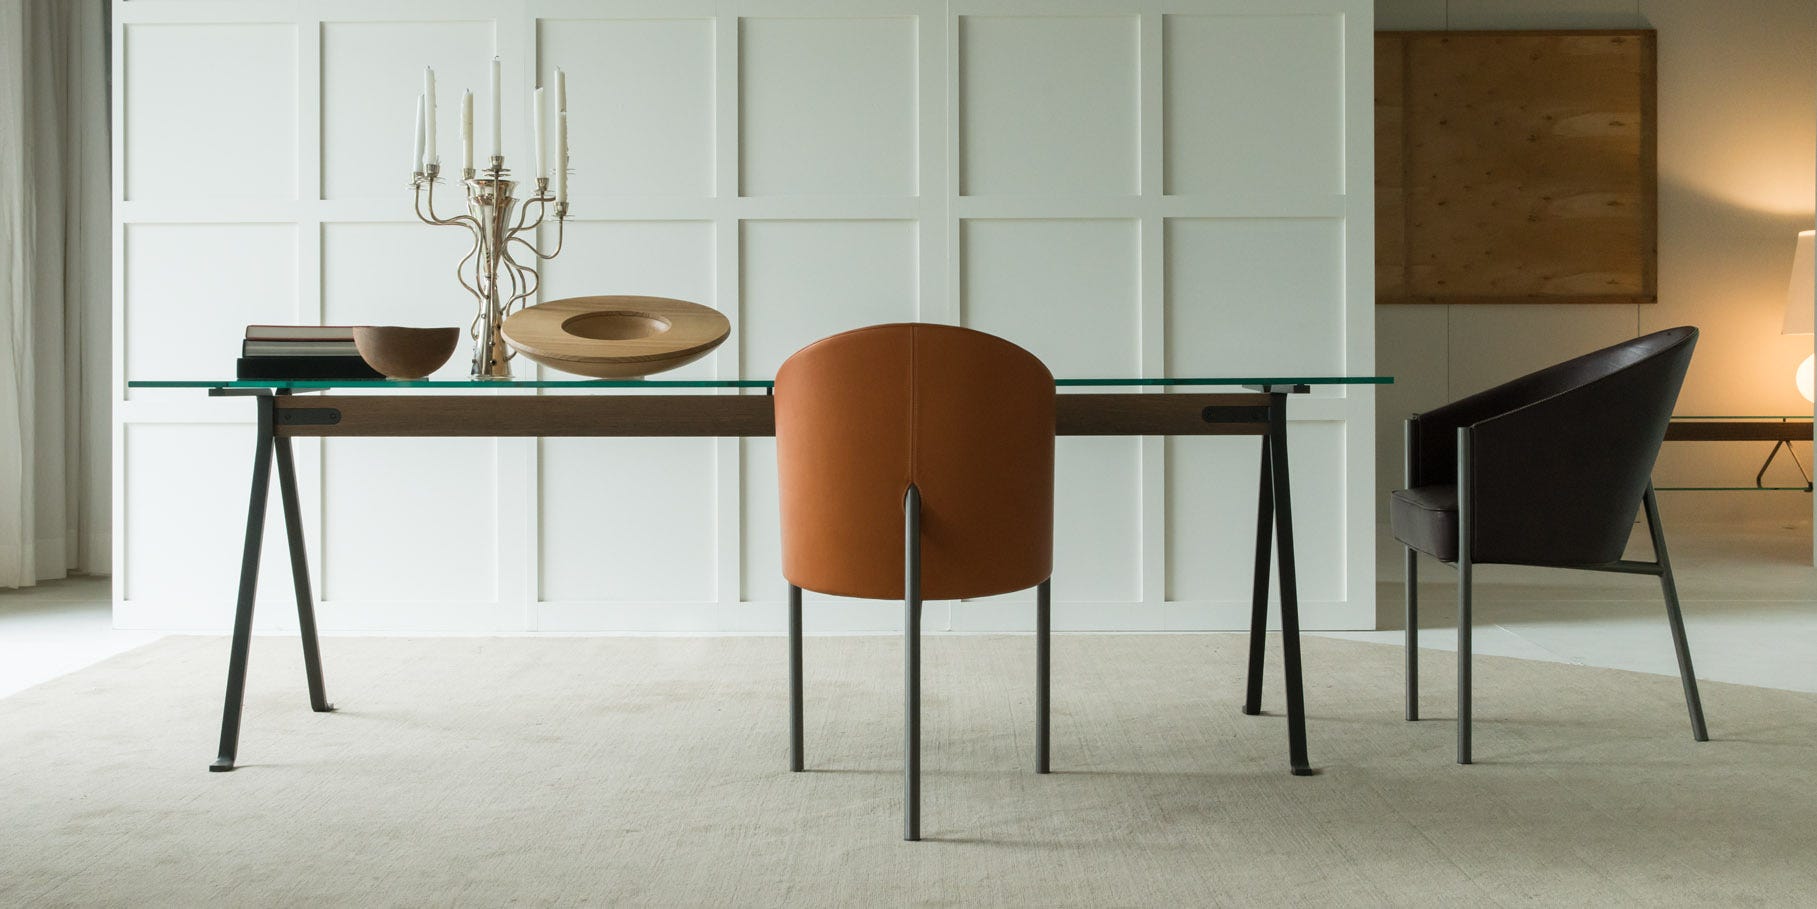 Driade Indoor - Frate Table design Enzo Mari with Costes chair design Philippe Starck